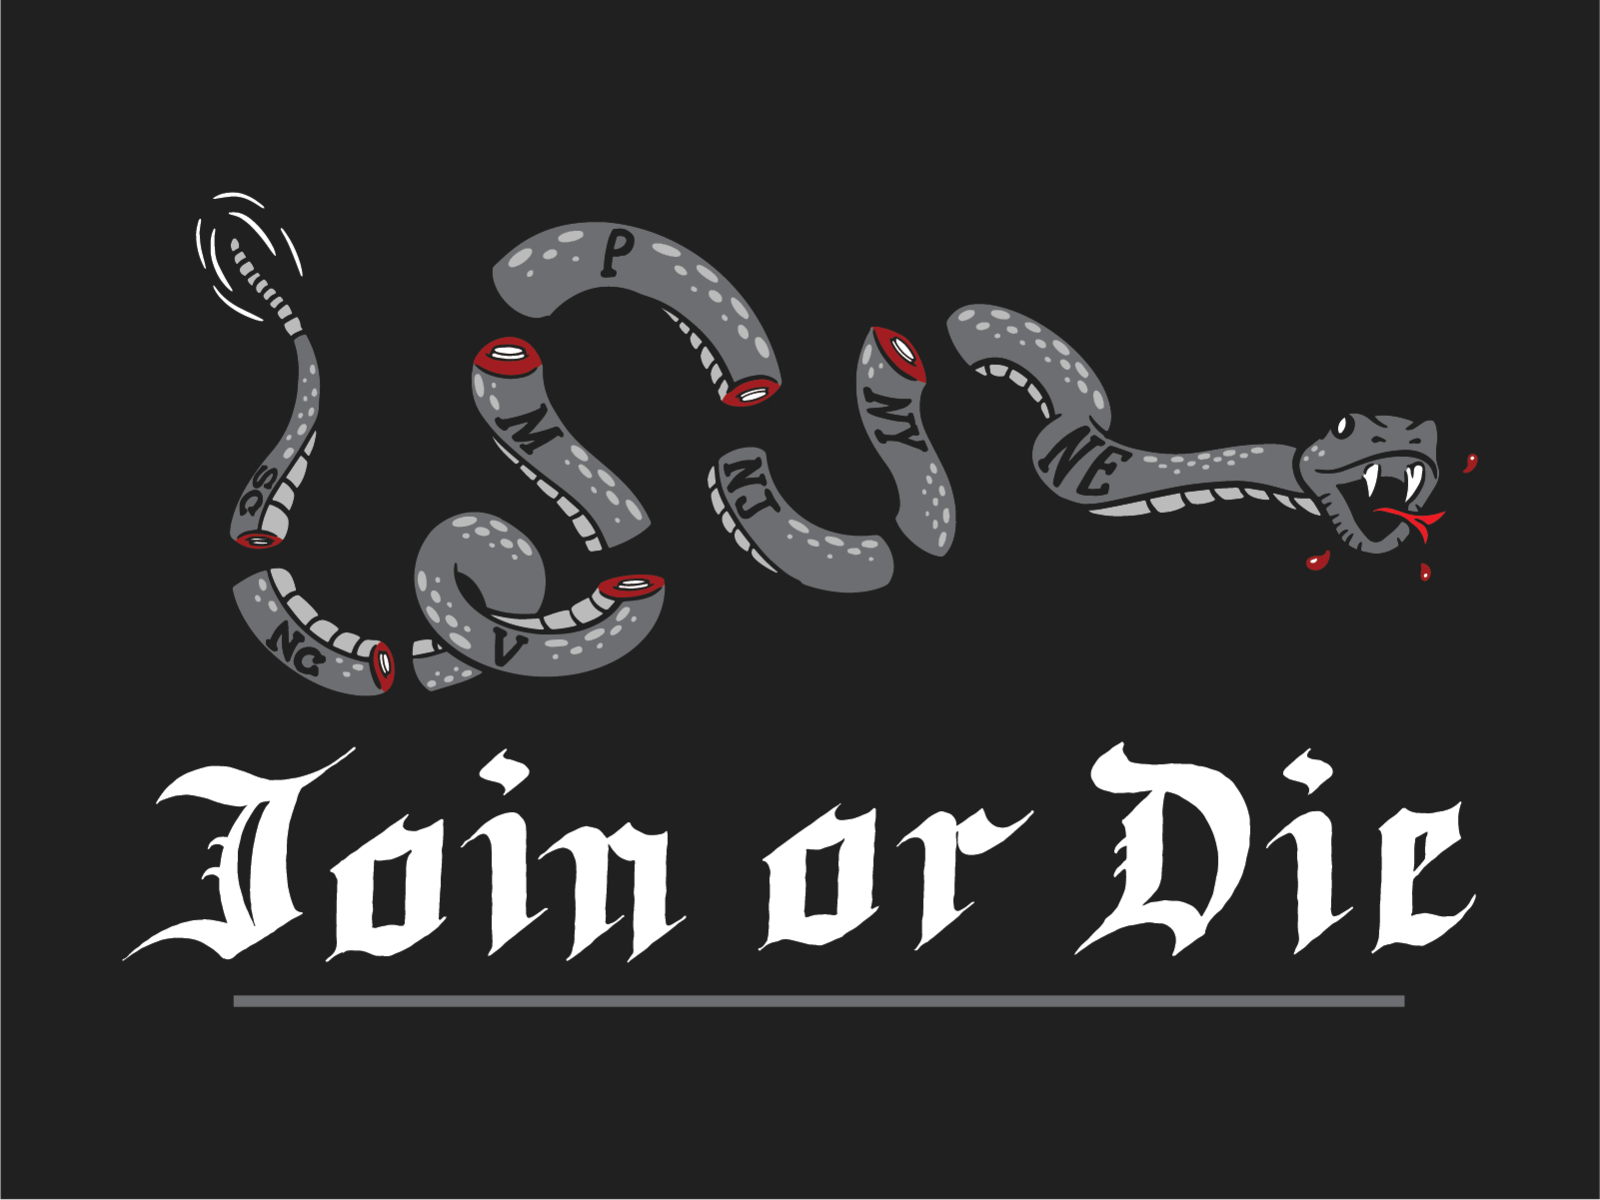 Join Or Die by Michael Deschenes - Undrafted Designs on Dribbble